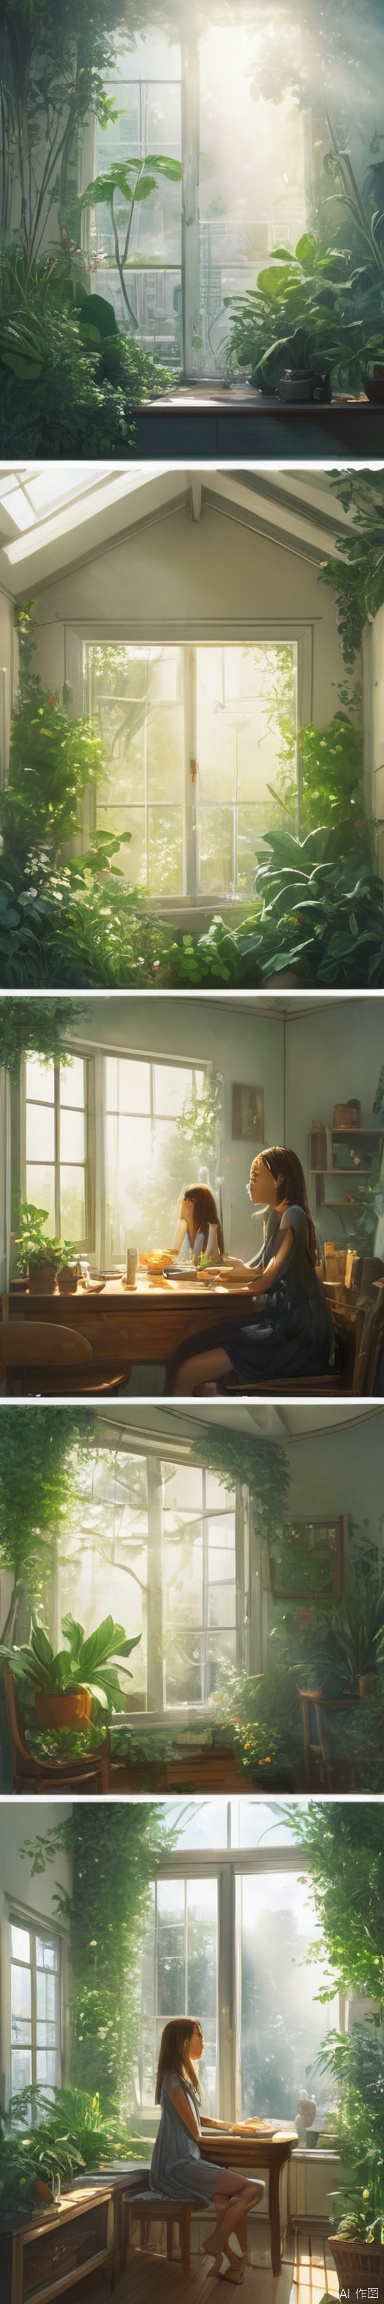 comic,a girl sitting in the sunny room looking at outside, surrounded by lush plants, exuding vitality. Sunlight streamed through the glass windows, falling onto the wooden furniture, creating a warm and cozy atmosphere. She gazed calmly out the window, a peaceful and joyful smile playing on her face, from below,from_behind ,warm theme,light and shadow, bokeh,foggy,by Roger Dean,